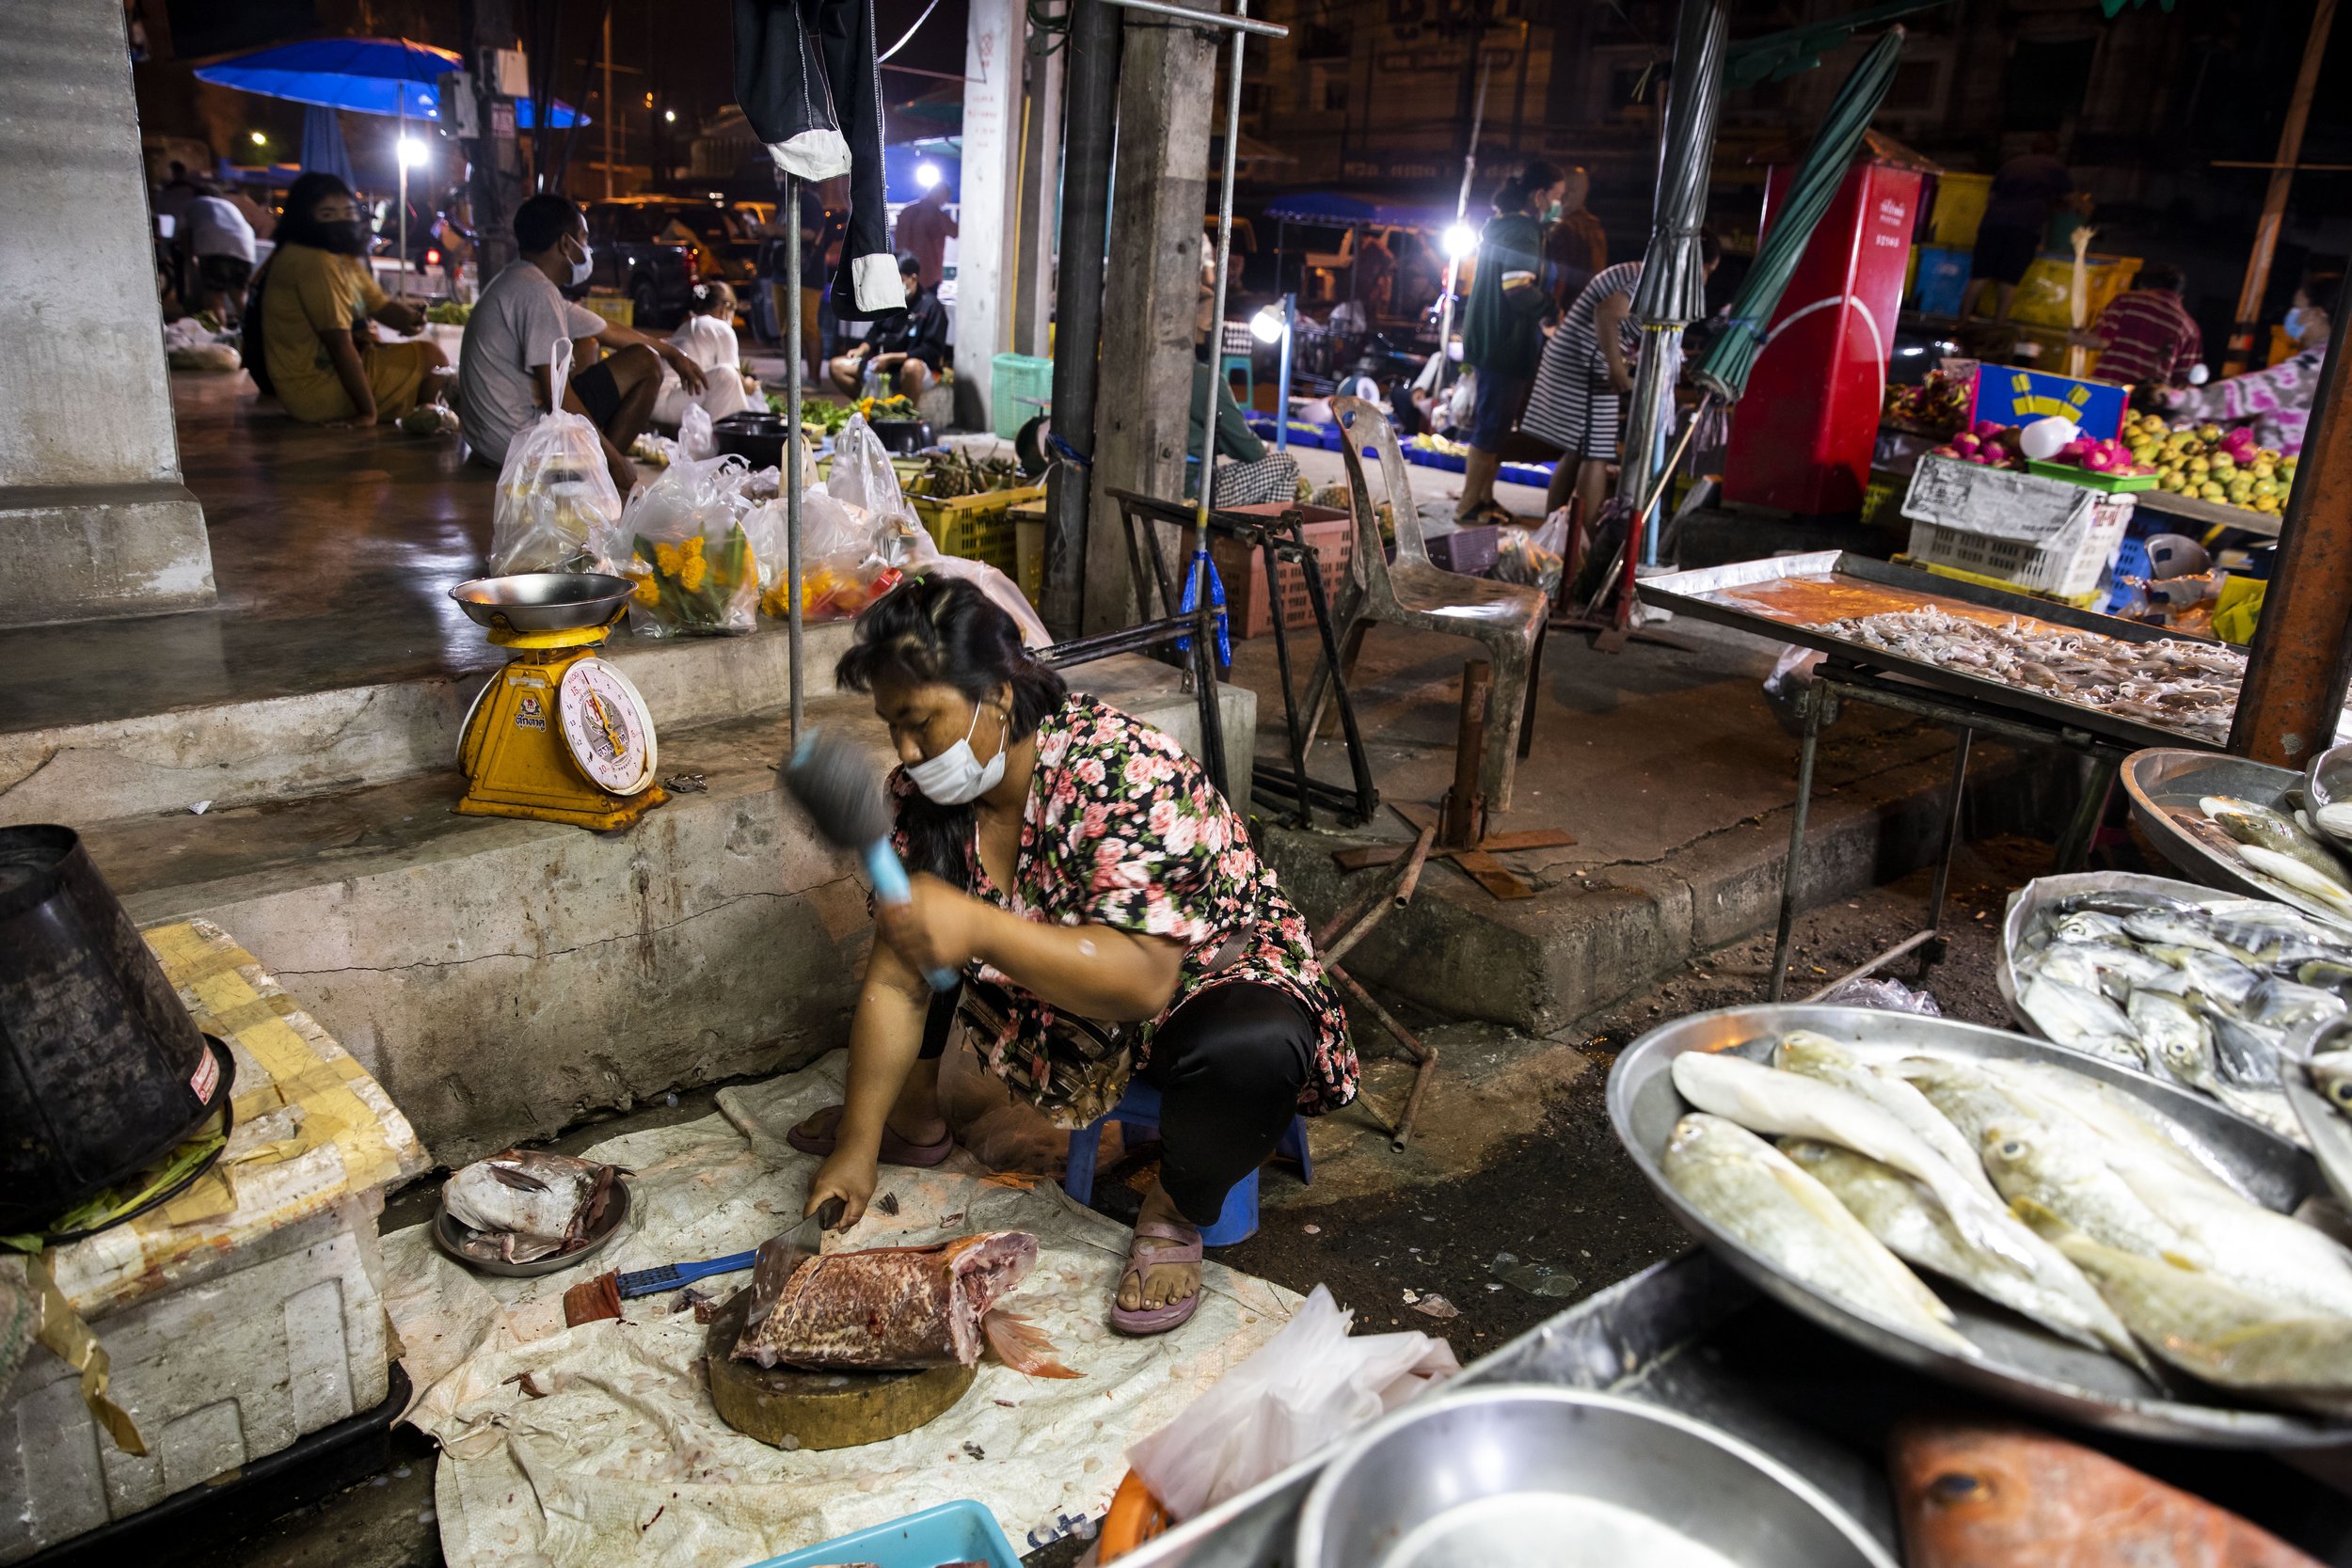  During an early morning market, a fish vendor filets a red snapper for Chutatip “Nok” Suntaranon (not pictured) in Yantakhao, Thailand on Saturday, April 16, 2022. The market in Yantakhao starts very early in the morning to accommodate the schedule 